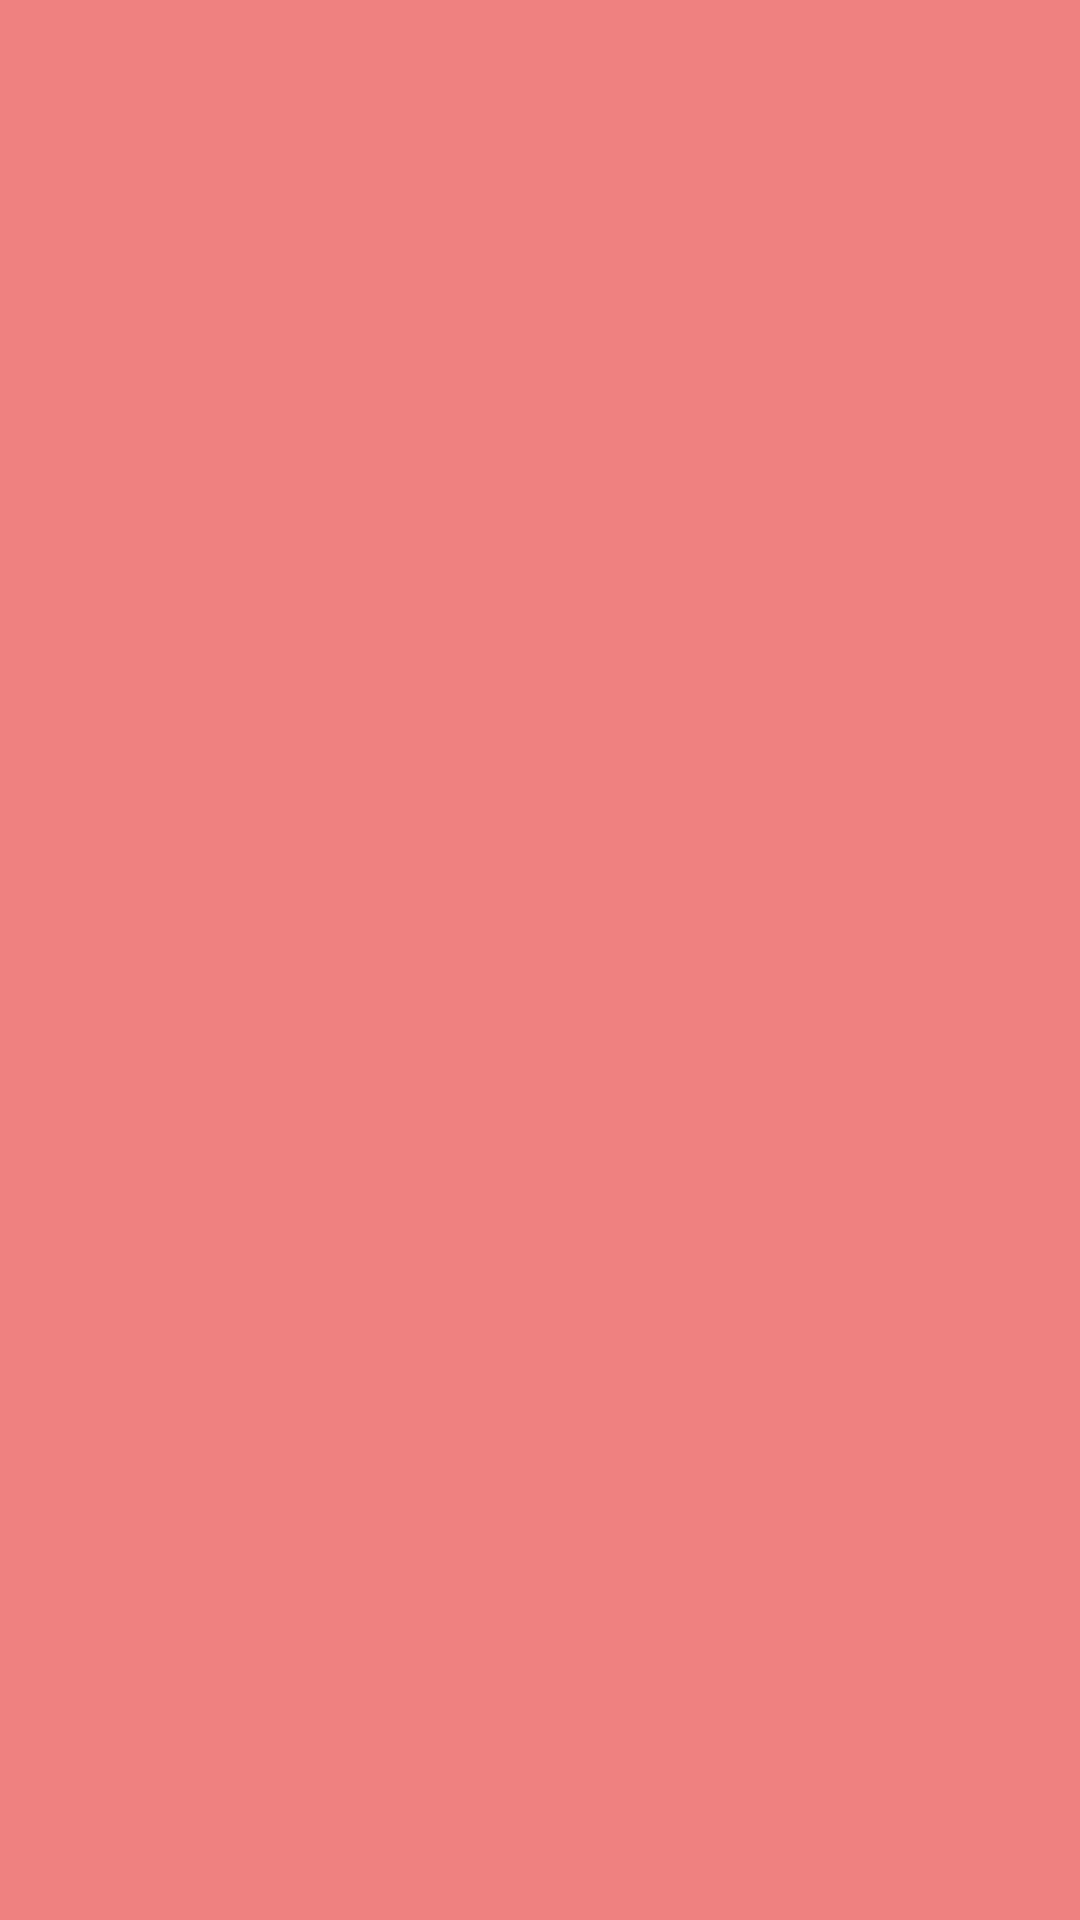 1080x1920 Light Coral Solid Color Background